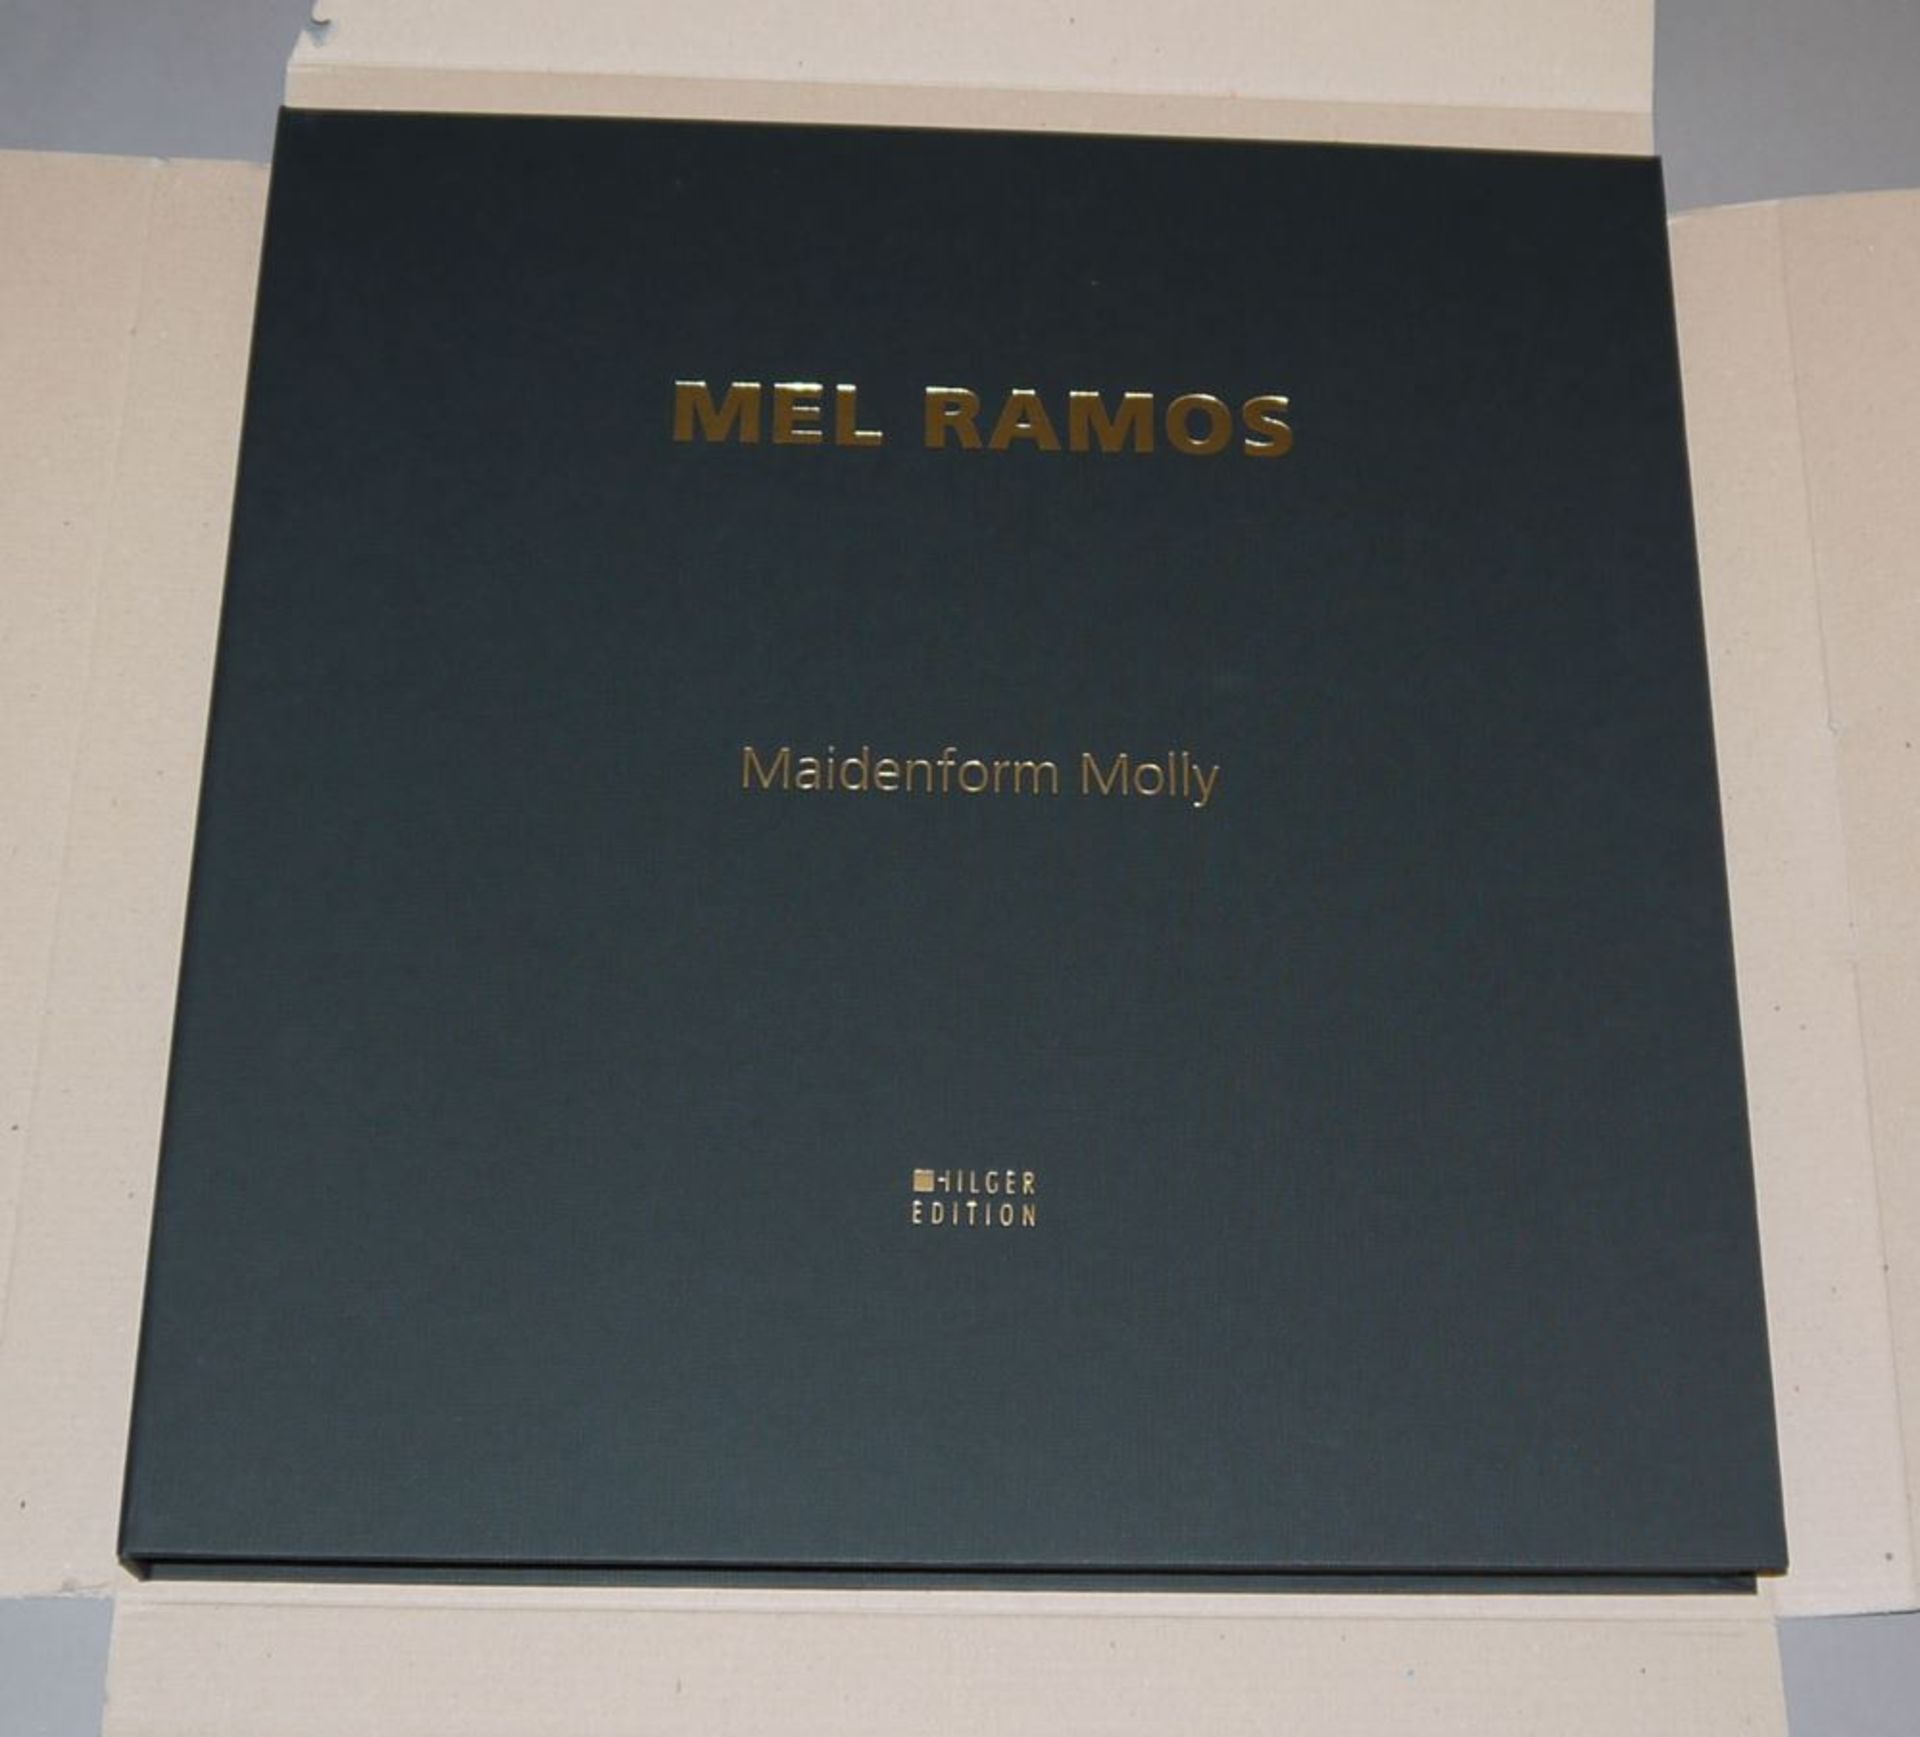 Mel Ramos, "Maidenform Molly", lithographic relief from 2014 in cassette, signed, original box - Image 3 of 4